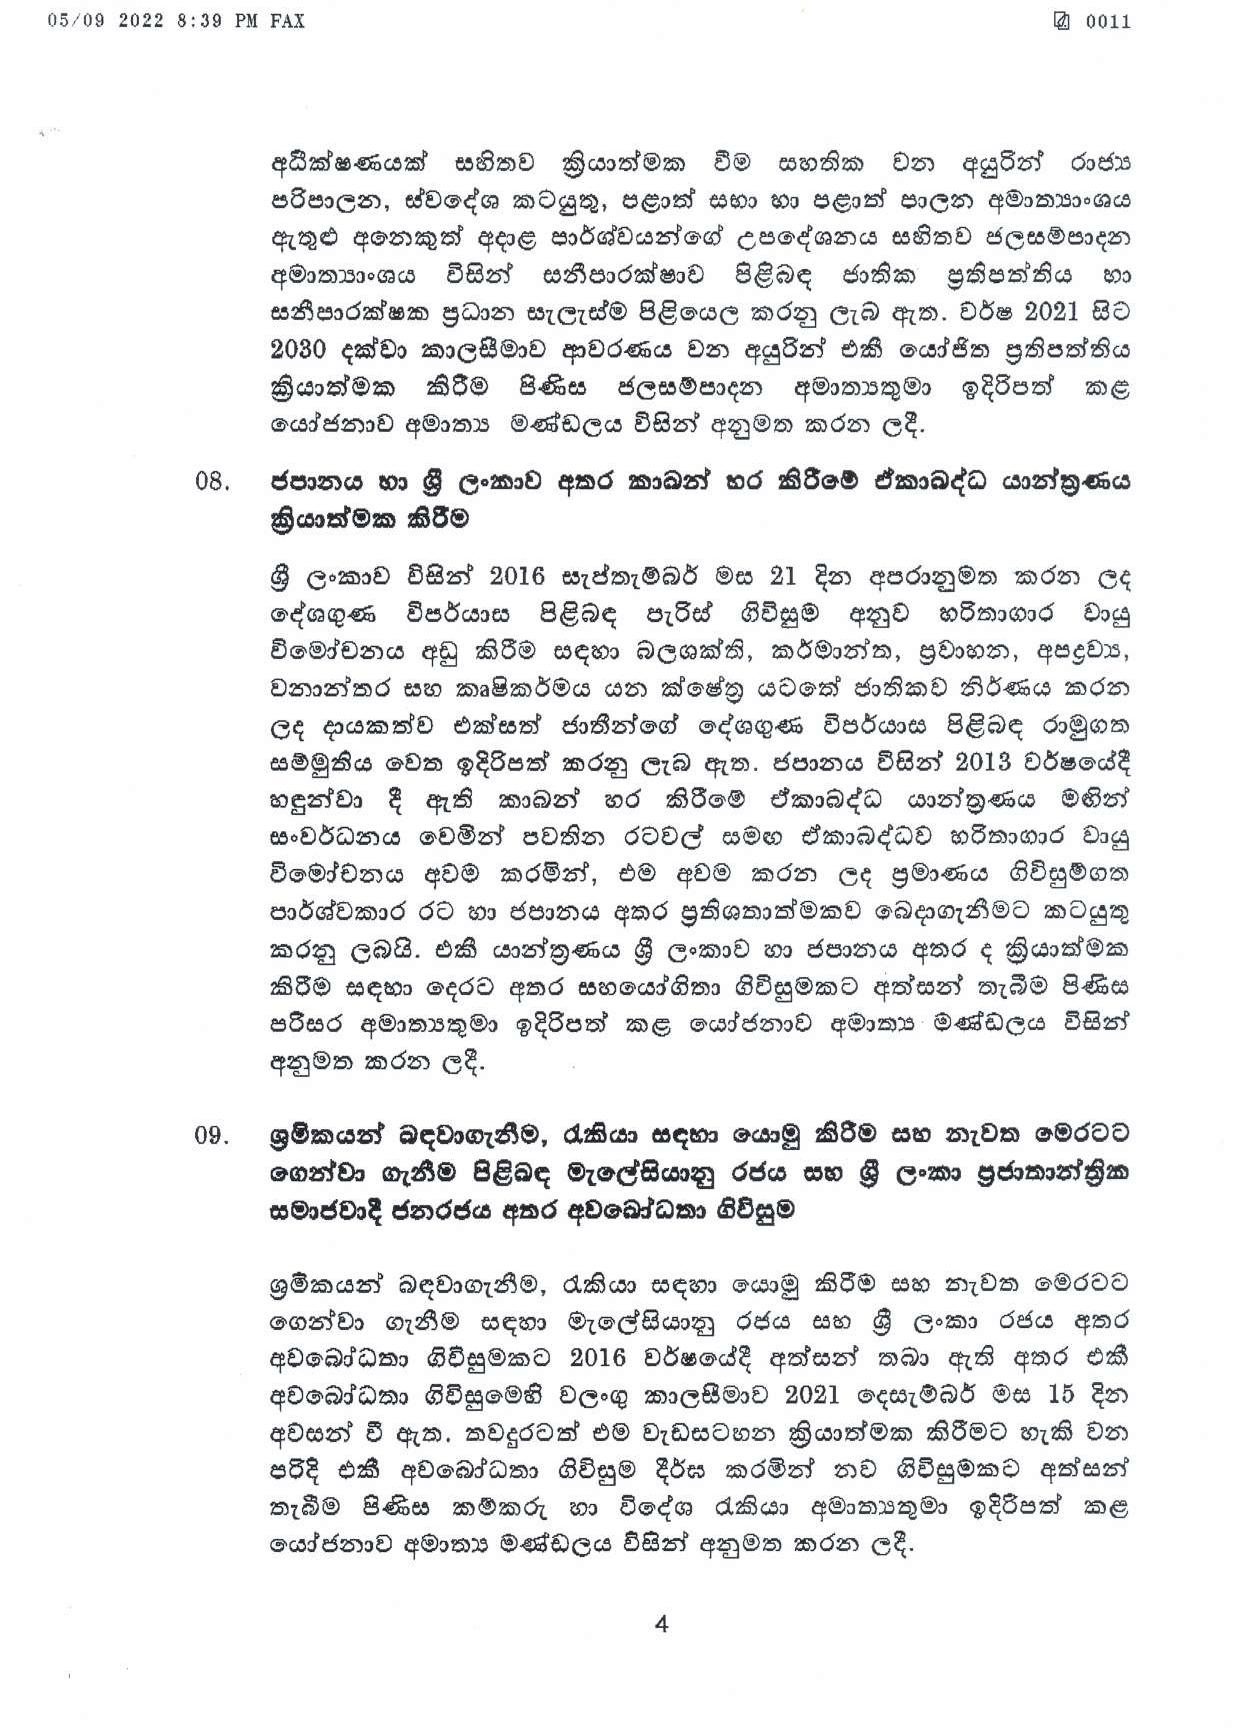 Cabinet Decision on 05.09.2022 page 004